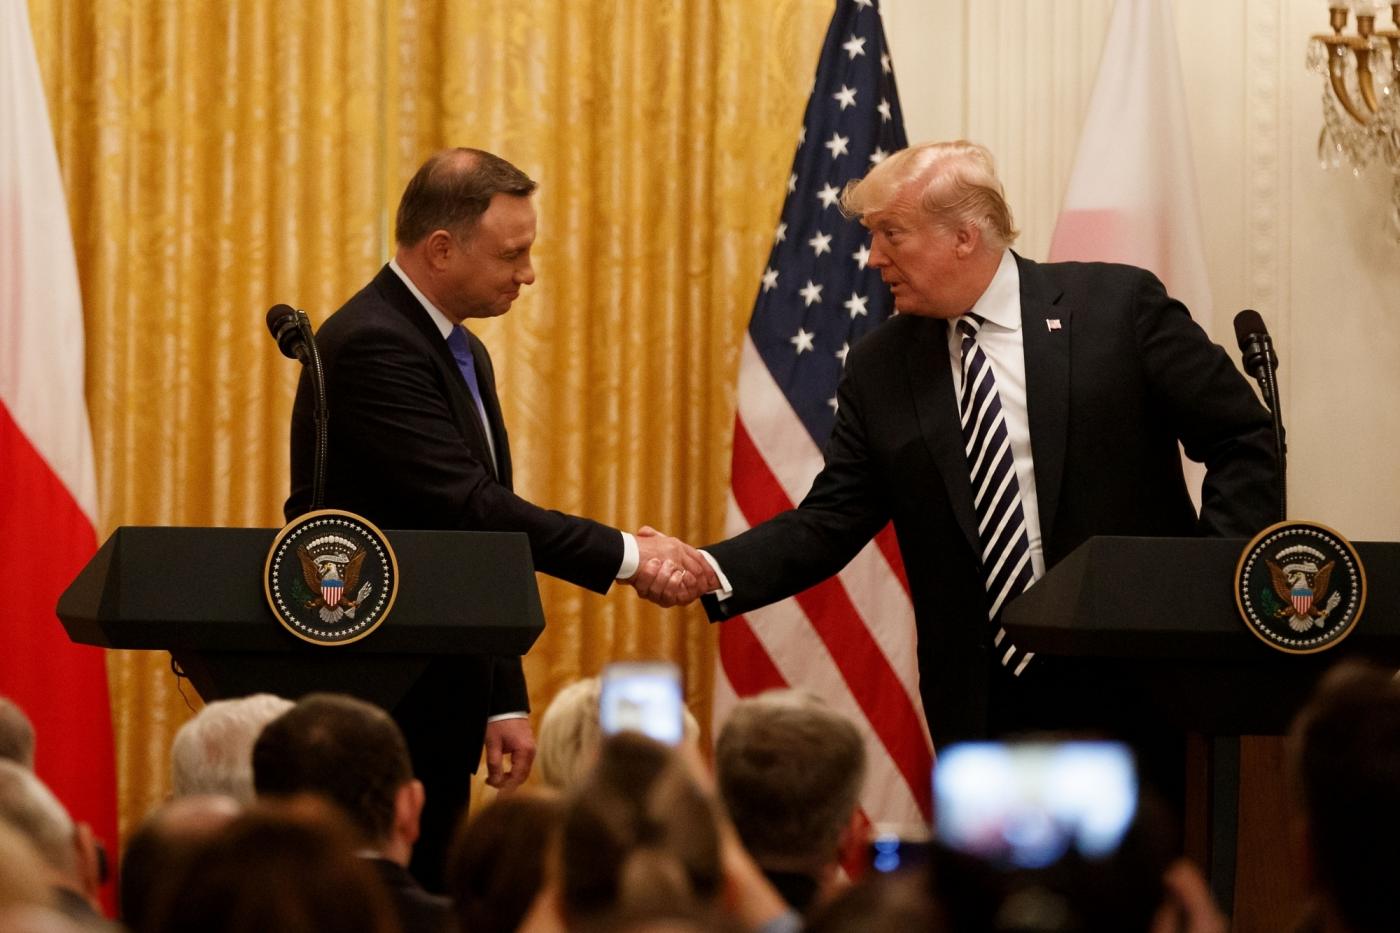 WASHINGTON D.C., Sept. 19, 2018 (Xinhua) -- U.S. President Donald Trump (R) and visiting Polish President Andrzej Duda attend a joint press conference at the White House in Washington D.C. Sept. 18, 2018. Donald Trump said on Tuesday that the U.S. was weighing the idea of establishing a permanent military base in Poland, a proposal raised by the visiting Polish leader. (Xinhua/Ting Shen/IANS) by . 